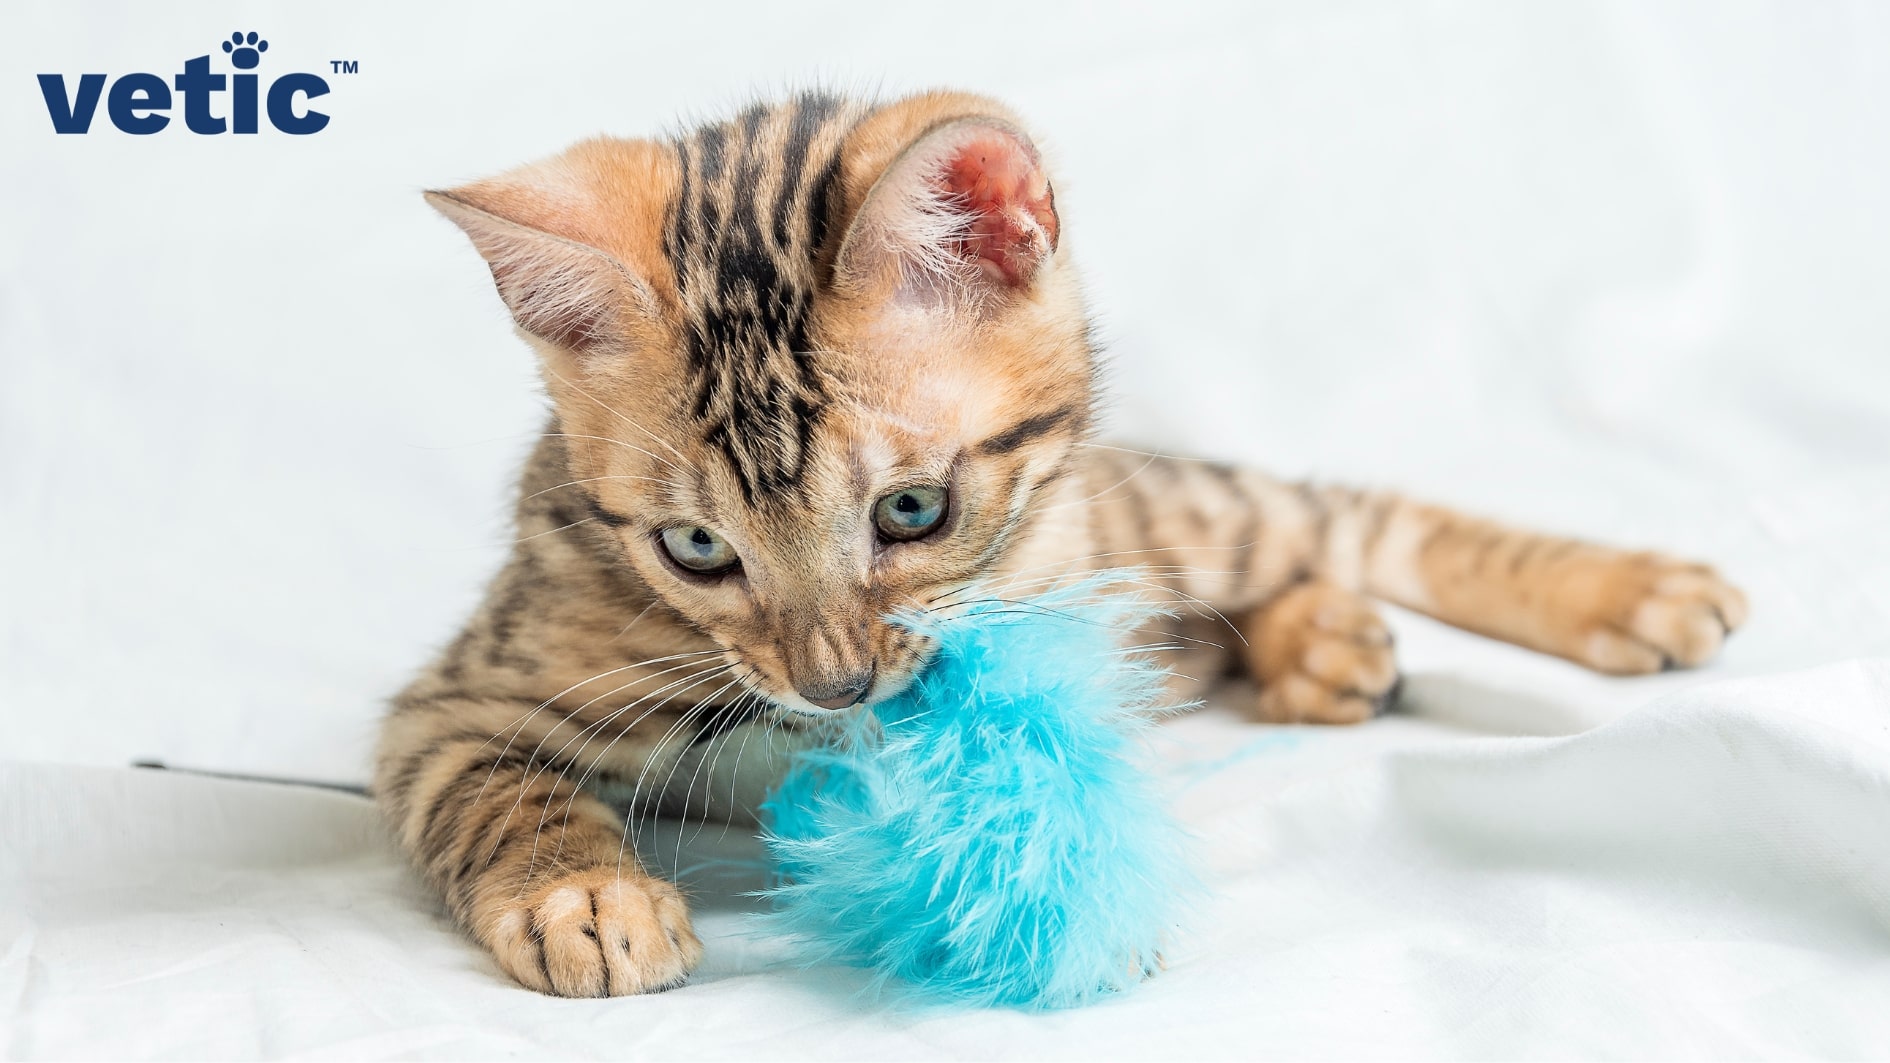 Full mackerel kitten with almond shaped green eyes playing with a blue feather toy. Panting in cats and kittens is common on a hot day after an intense play session.